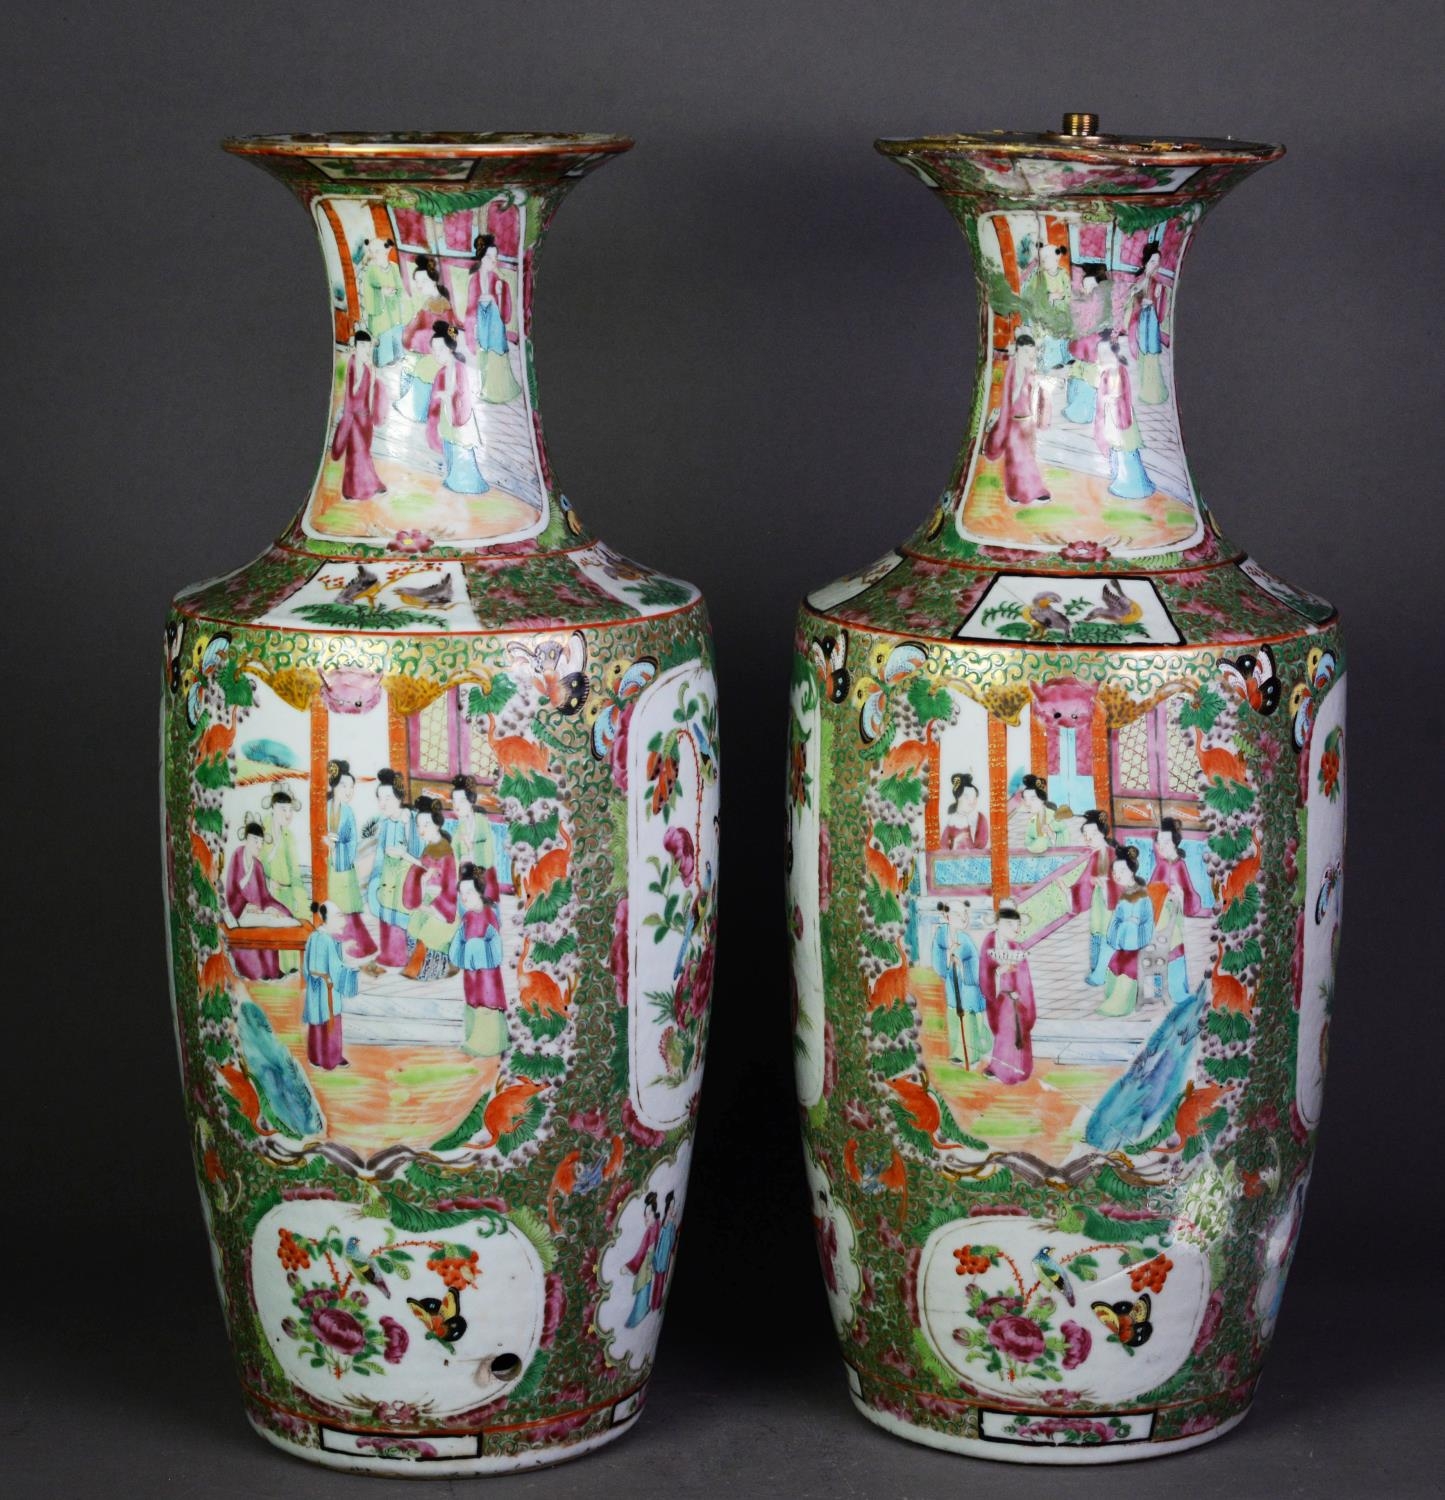 PAIR OF CHINESE LATE QING DYNASTY CANTON DECORATED VASES, the oviform bodies beneath waisted